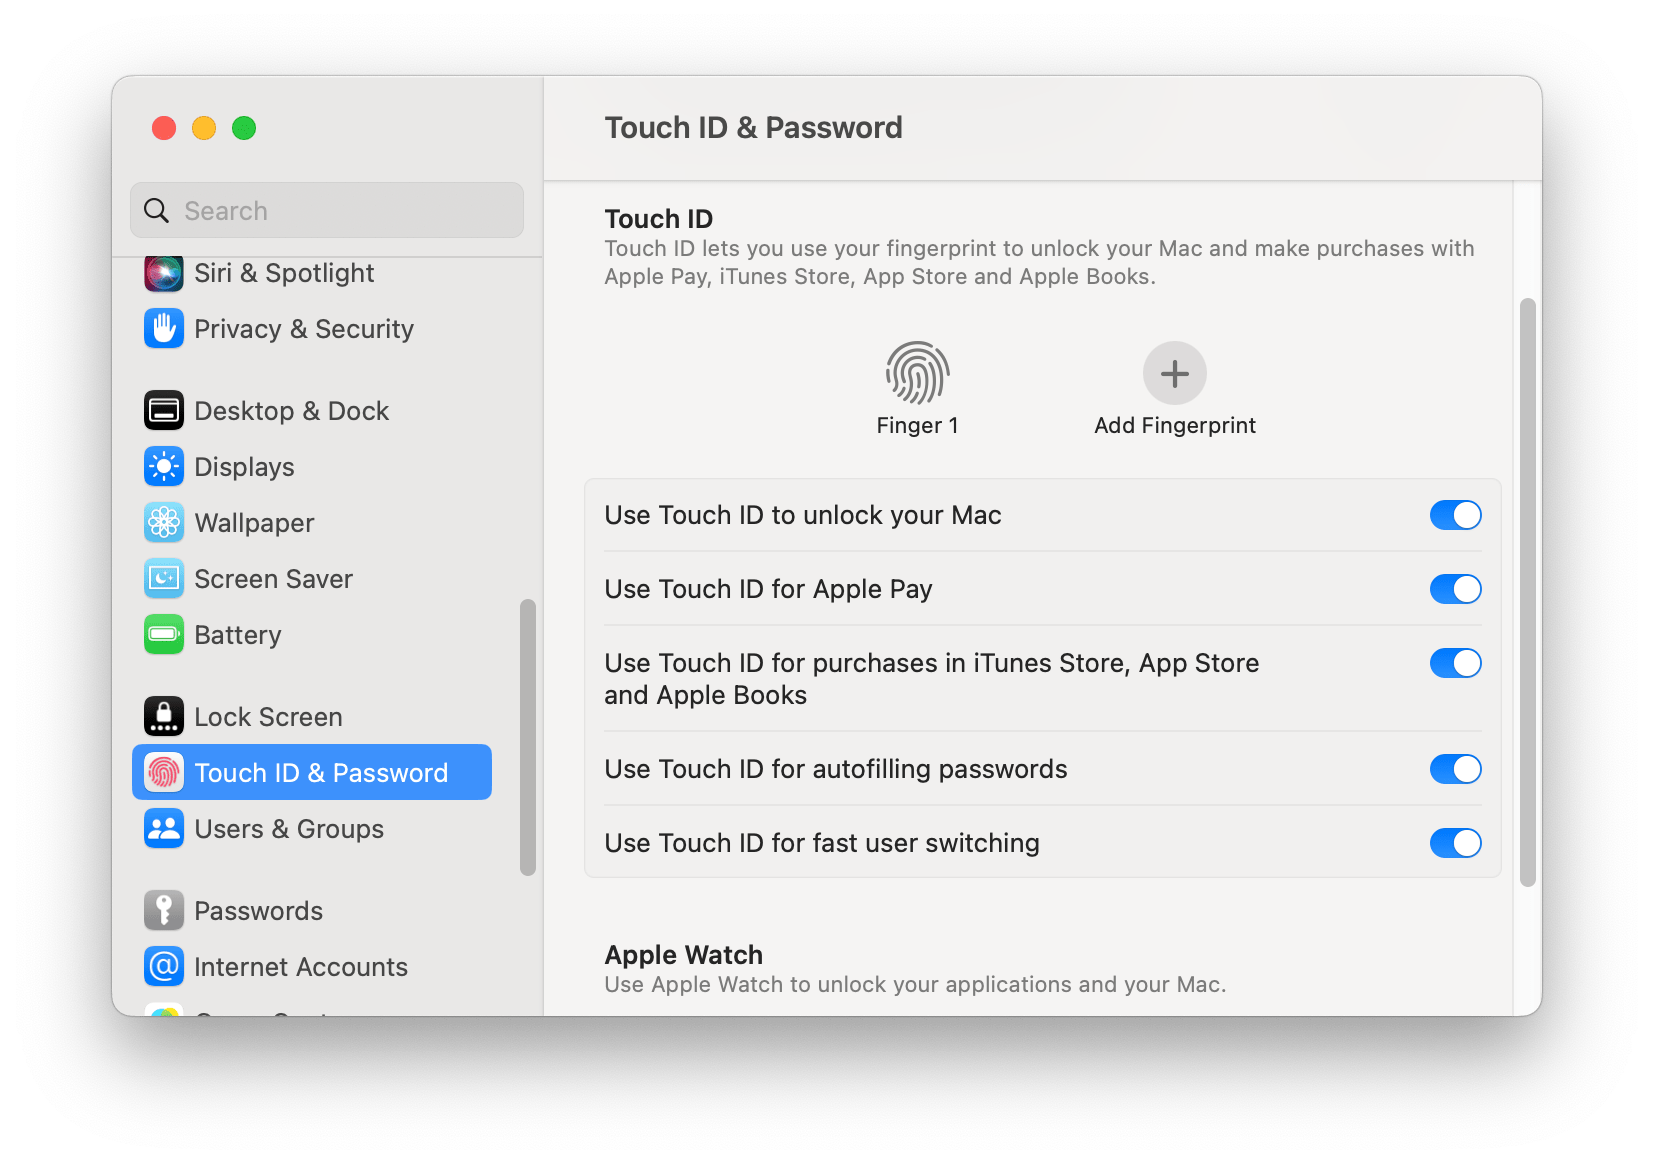 System settings showing Touch ID section